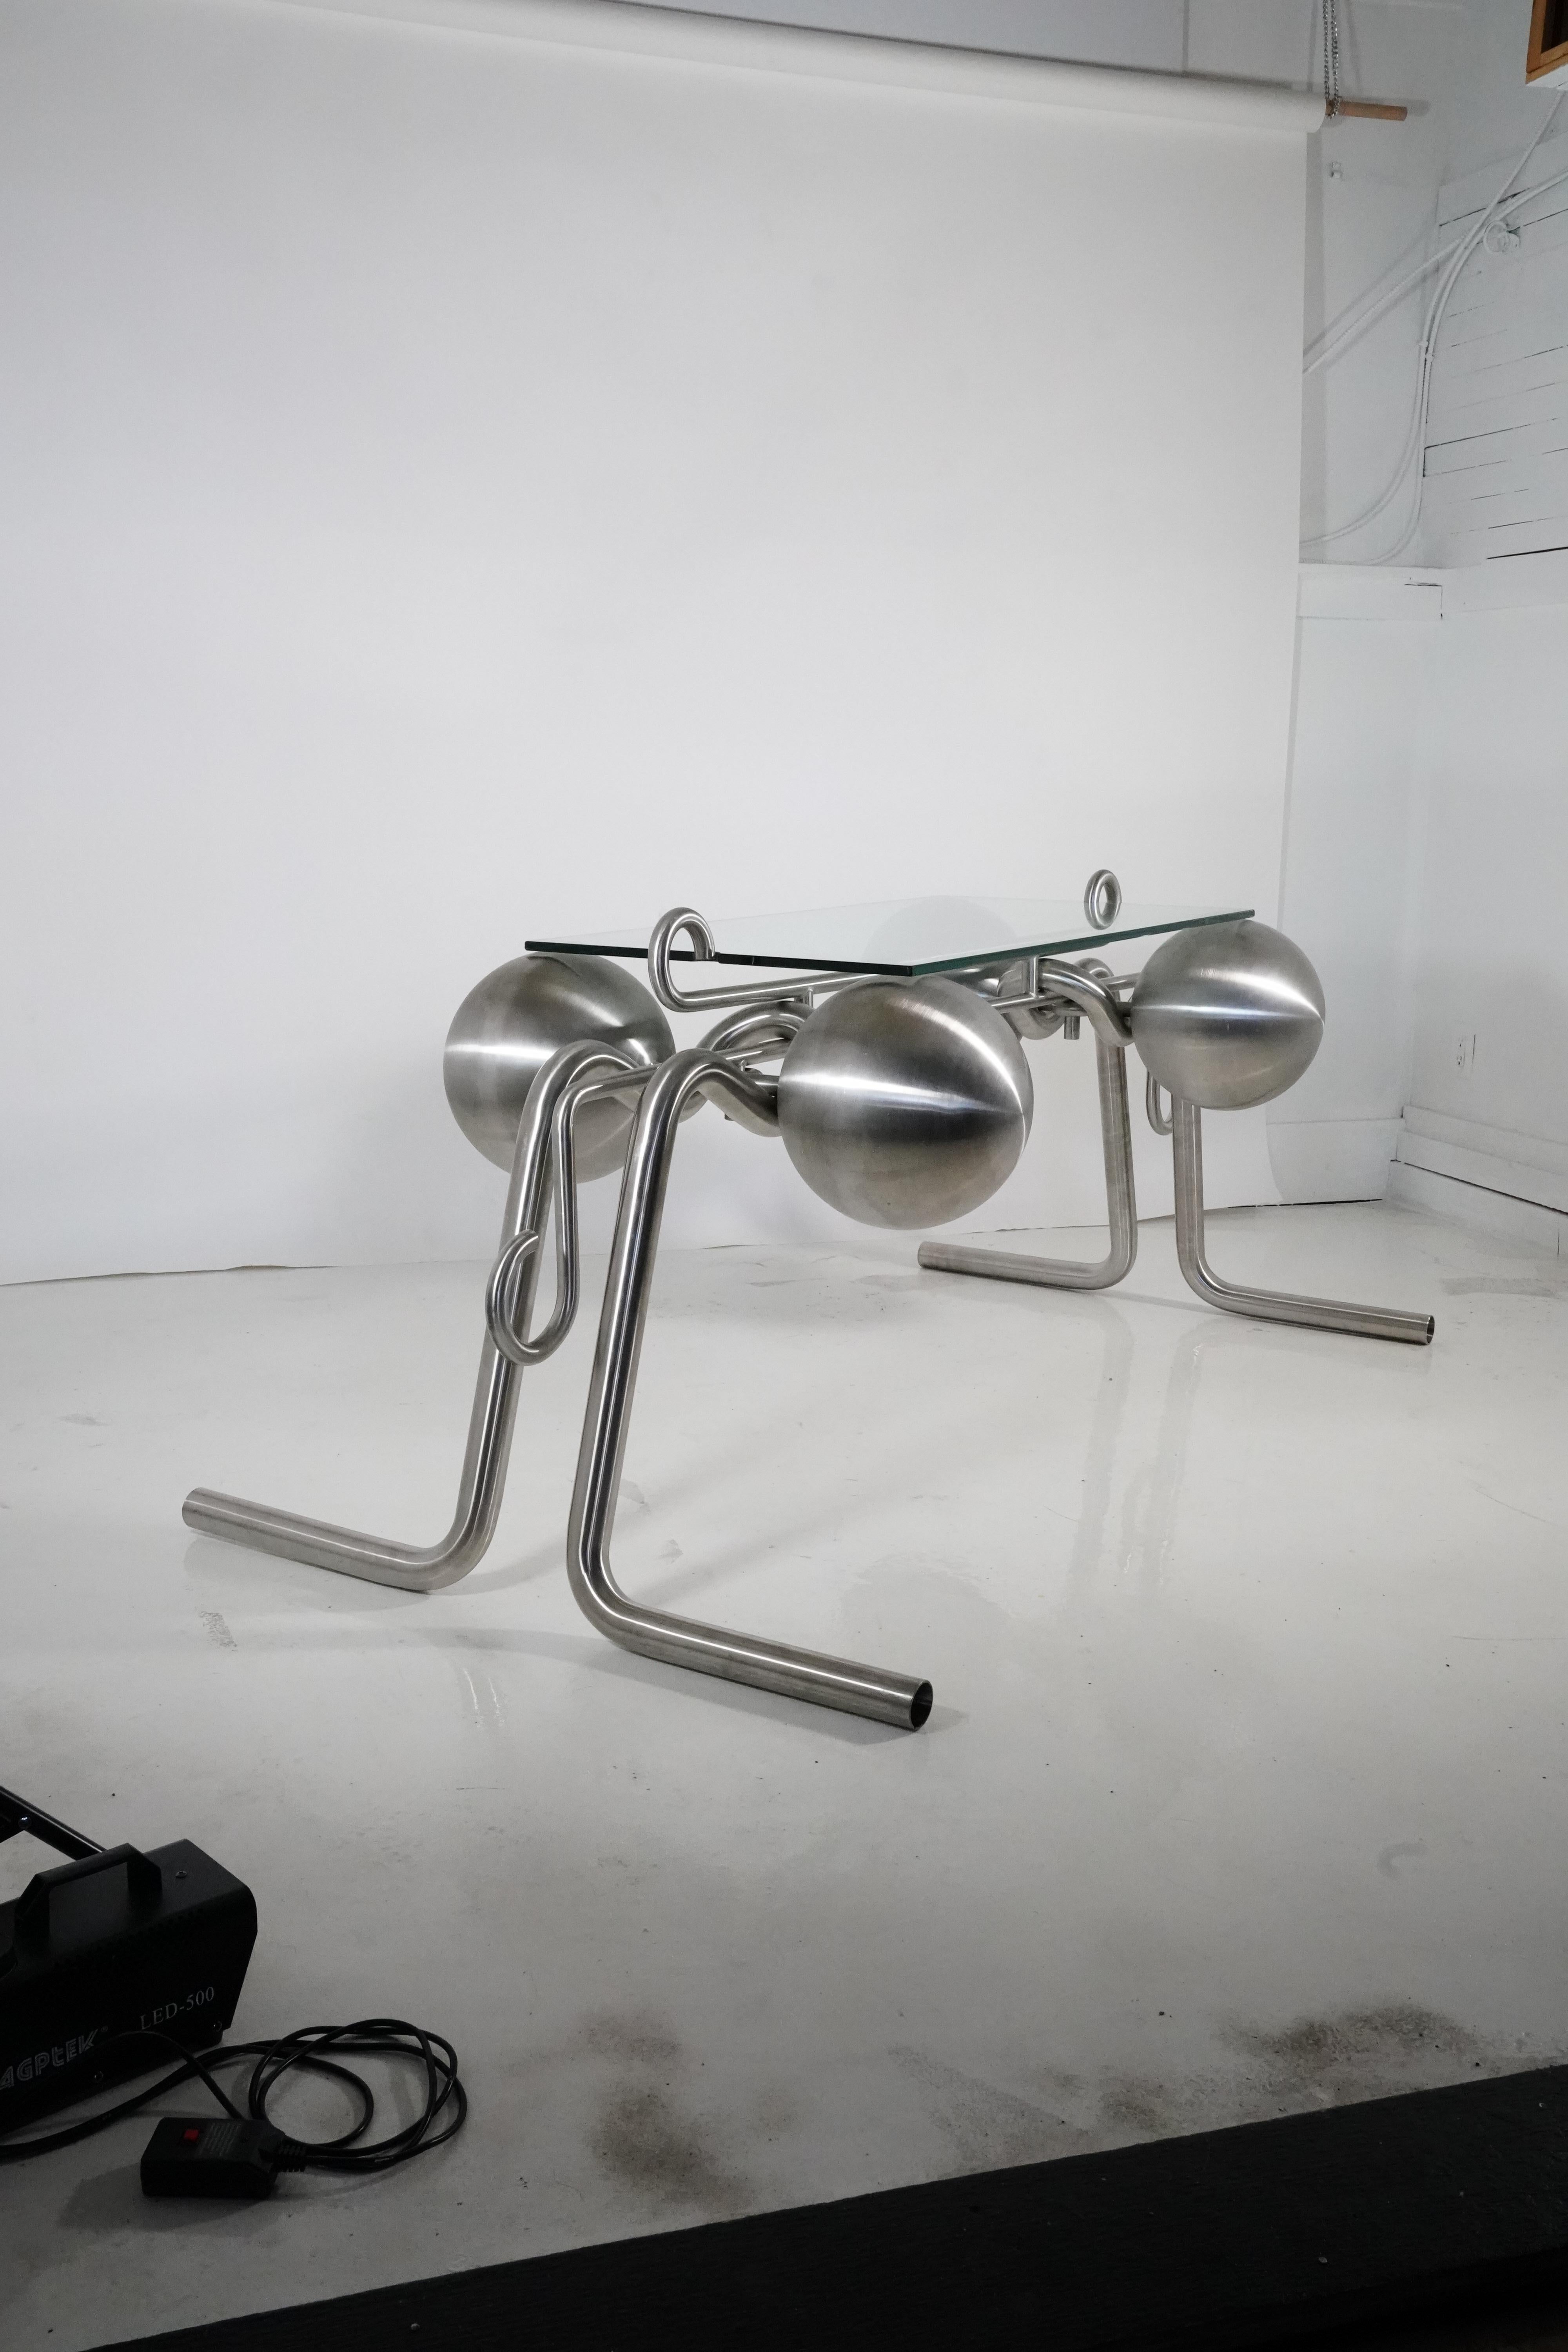 Table For the Artless Administrator by Kevin Li
Dimensions: W 203.2 x D 101.6 x H 76.2 cm
Materials: Stainless steel, Tempered glass
Material options: weather-resistant/non-rusting, non-magnetic, highly - temperature resistant. Alternative steel